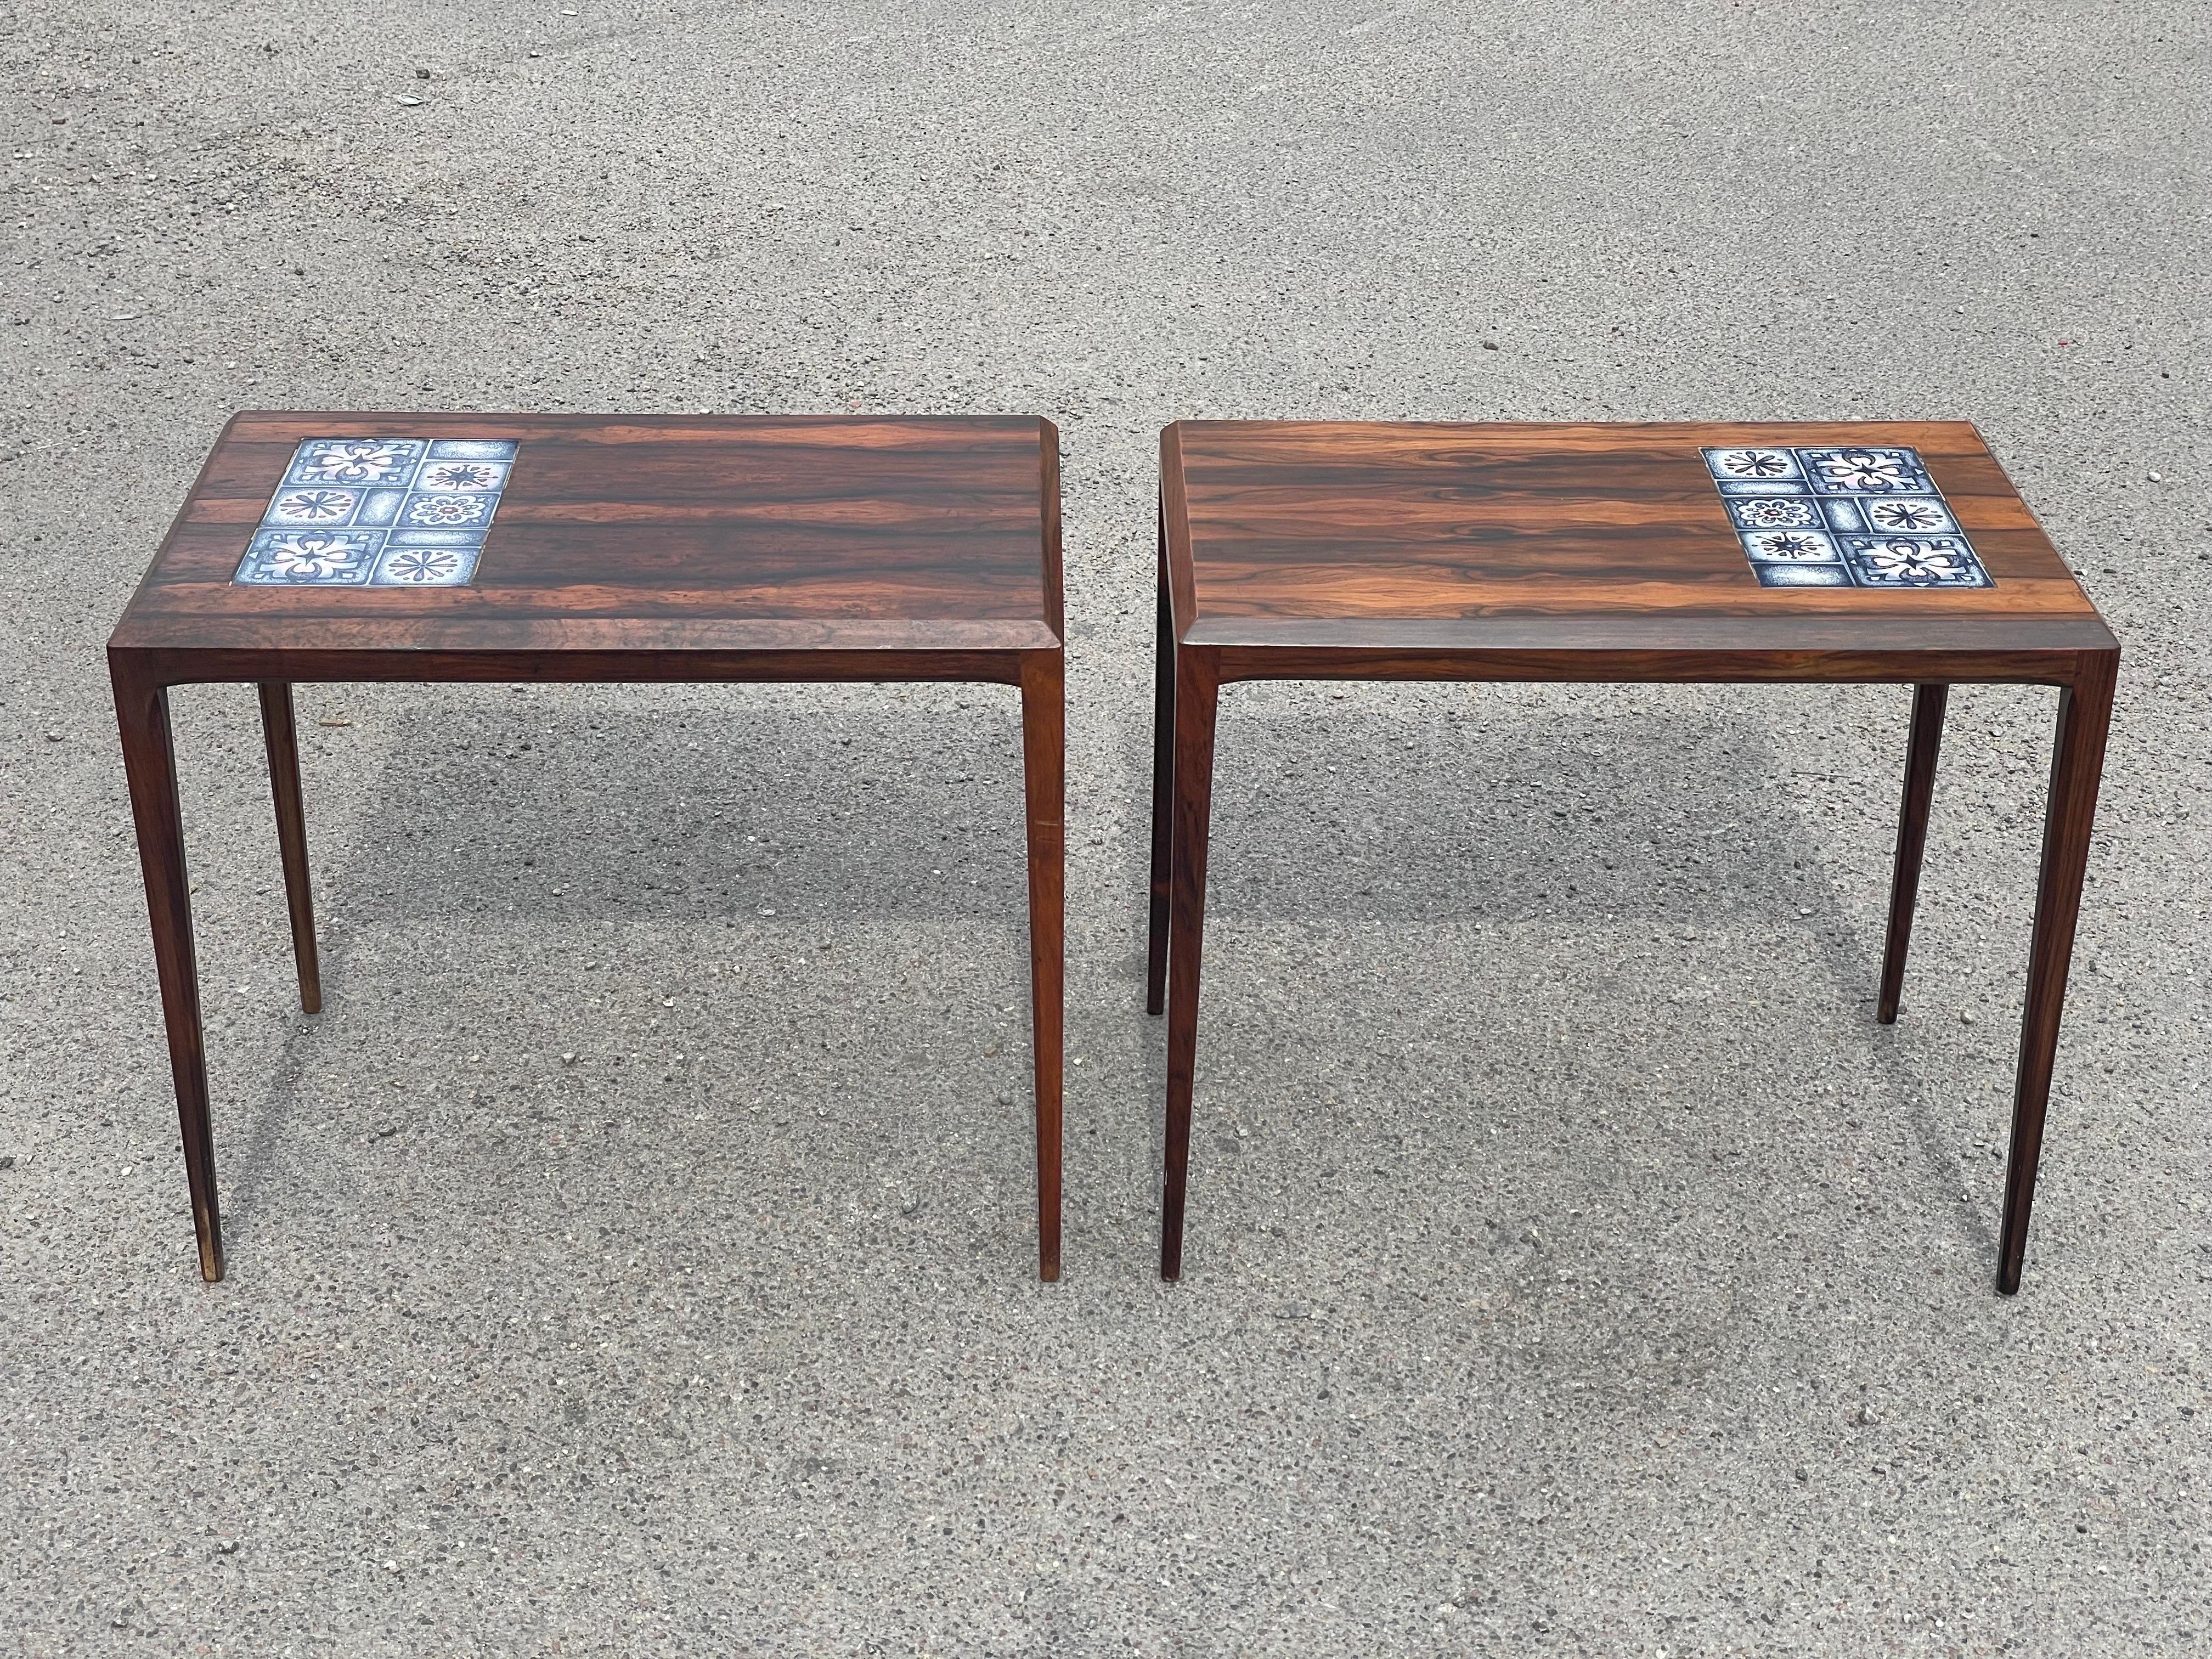 a timeless treasure from the 1960s: a stunning pair of rosewood side tables with Faience tile tops crafted by the renowned Severin Hansen. Manufactured by the esteemed Haslev Møbelfabrik in Denmark, these tables boast exquisite tiles made by none